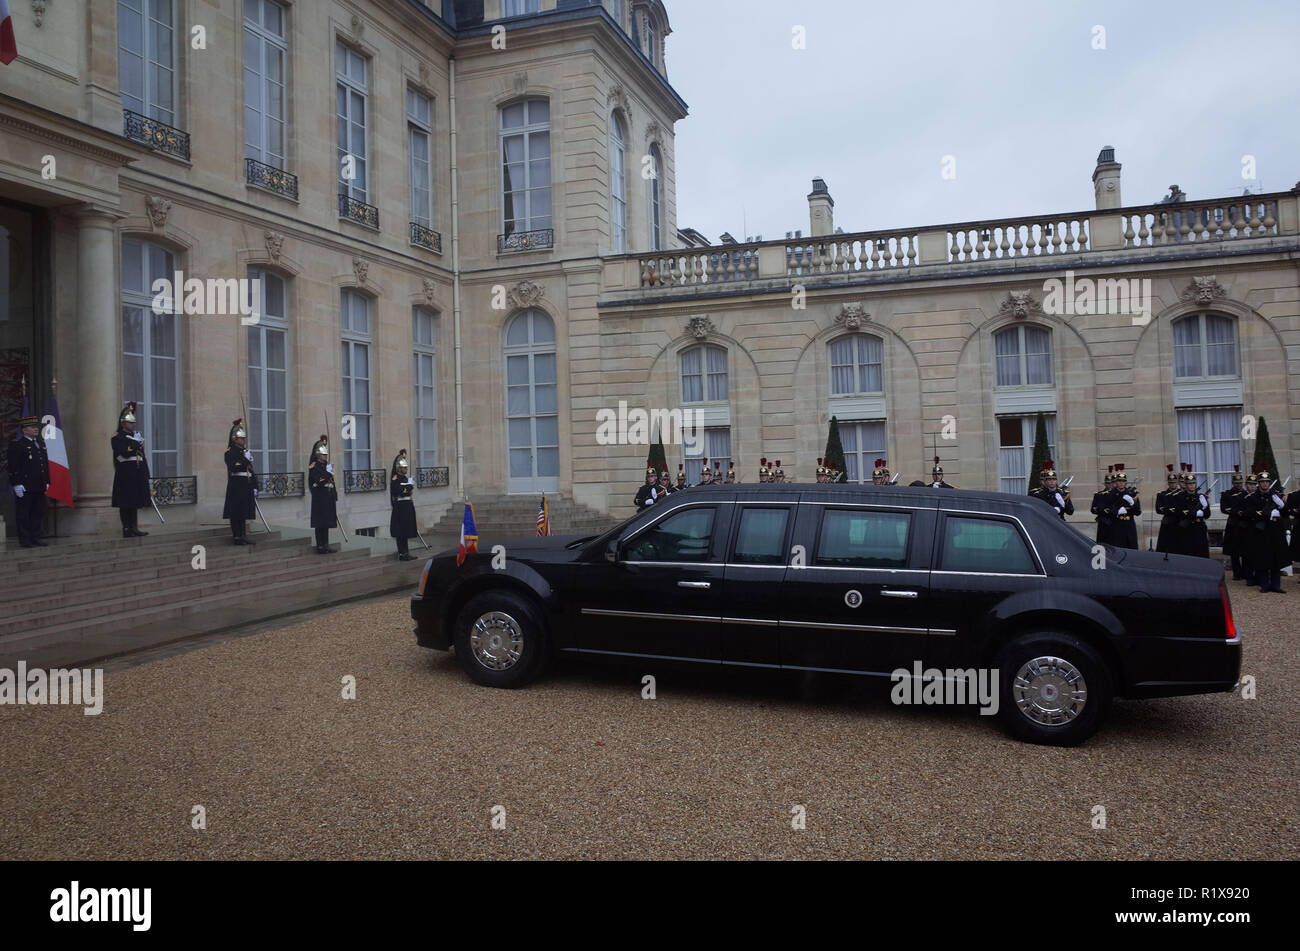 November 10, 2018 - Paris, France: US President Donald Trump's armored limousine, known as 'the beast', is parked in the courtyard of the Elysee palace. La limousine blindŽe du president americain Donald Trump garee dans la cour de l'Elysee. *** FRANCE OUT / NO SALES TO FRENCH MEDIA *** Stock Photo